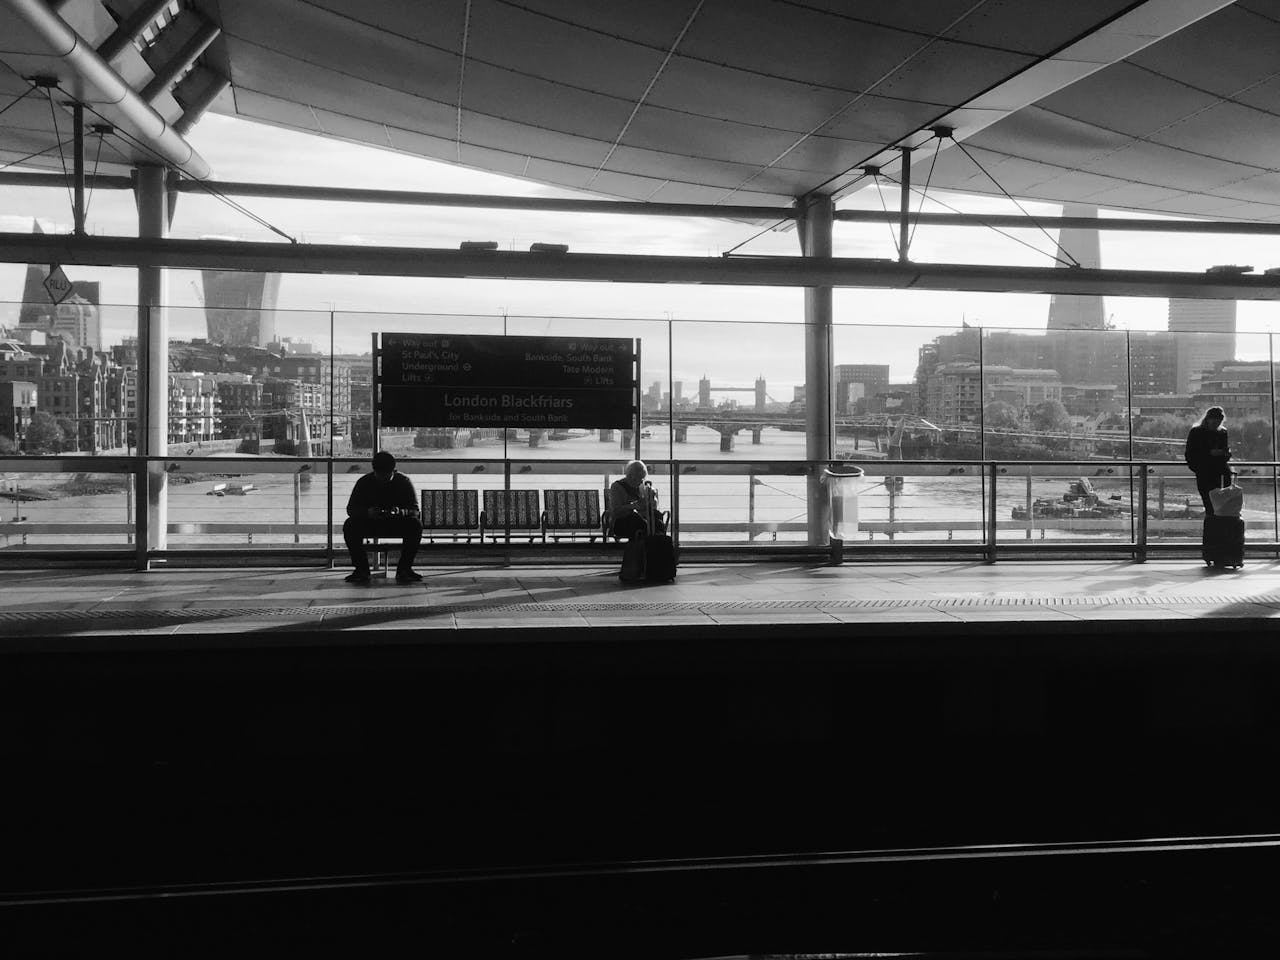 The view of the River Thames from Blackfriars Station in London 